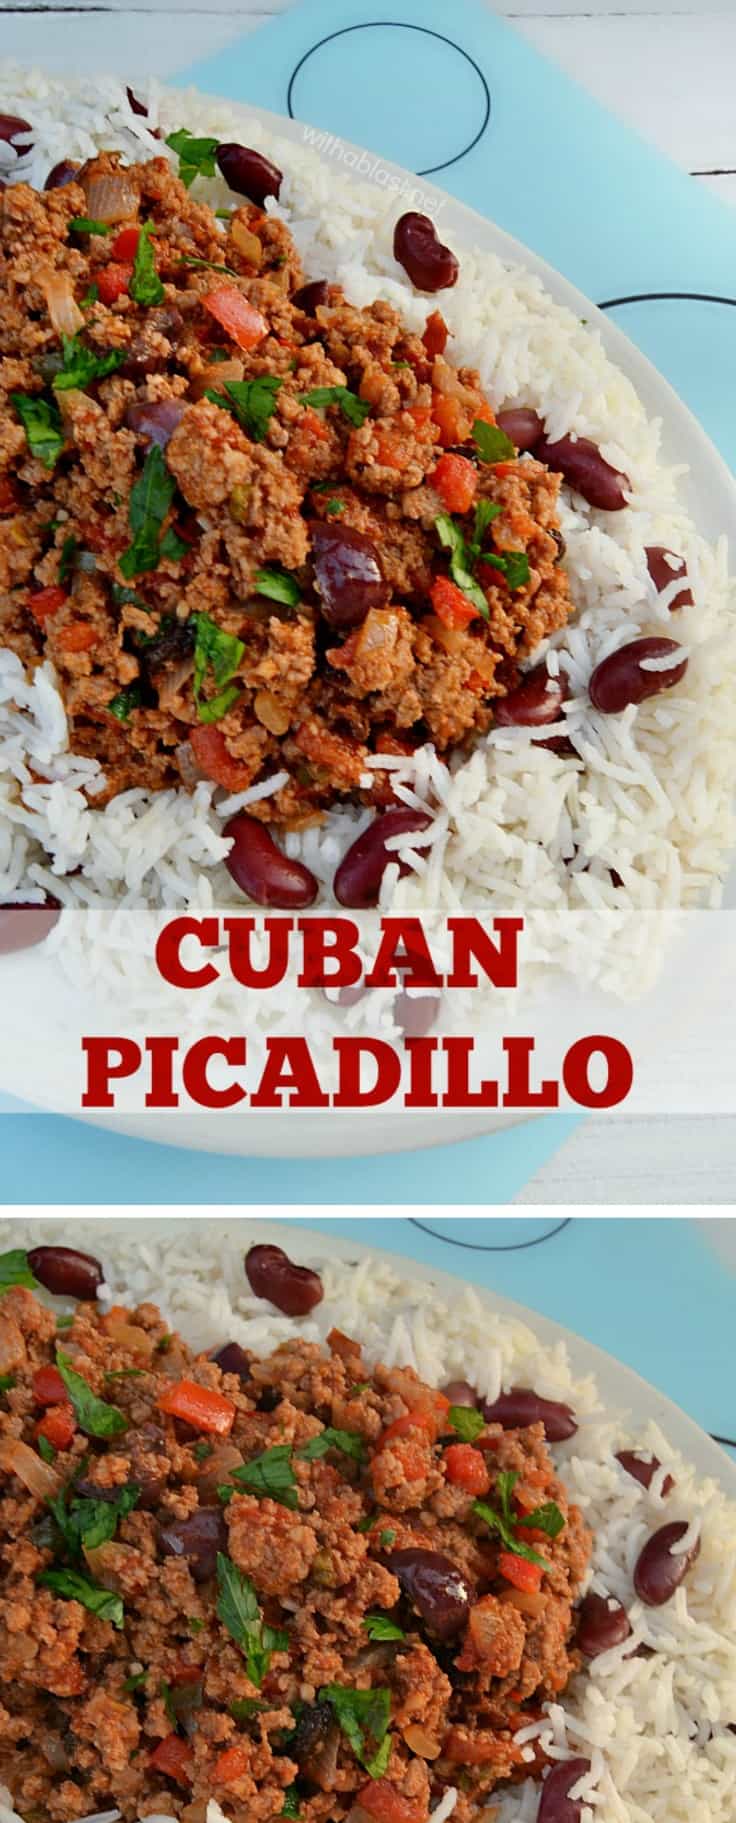 Cuban Picadillo served with a side of Rice and Beans is a quick ground beef, spicy dinner - only 30 minutes from prepping to serving ! #CubanPicadillo #PicadilloRecipe #GroundBeefRecipes #QuickDinnerRecipes